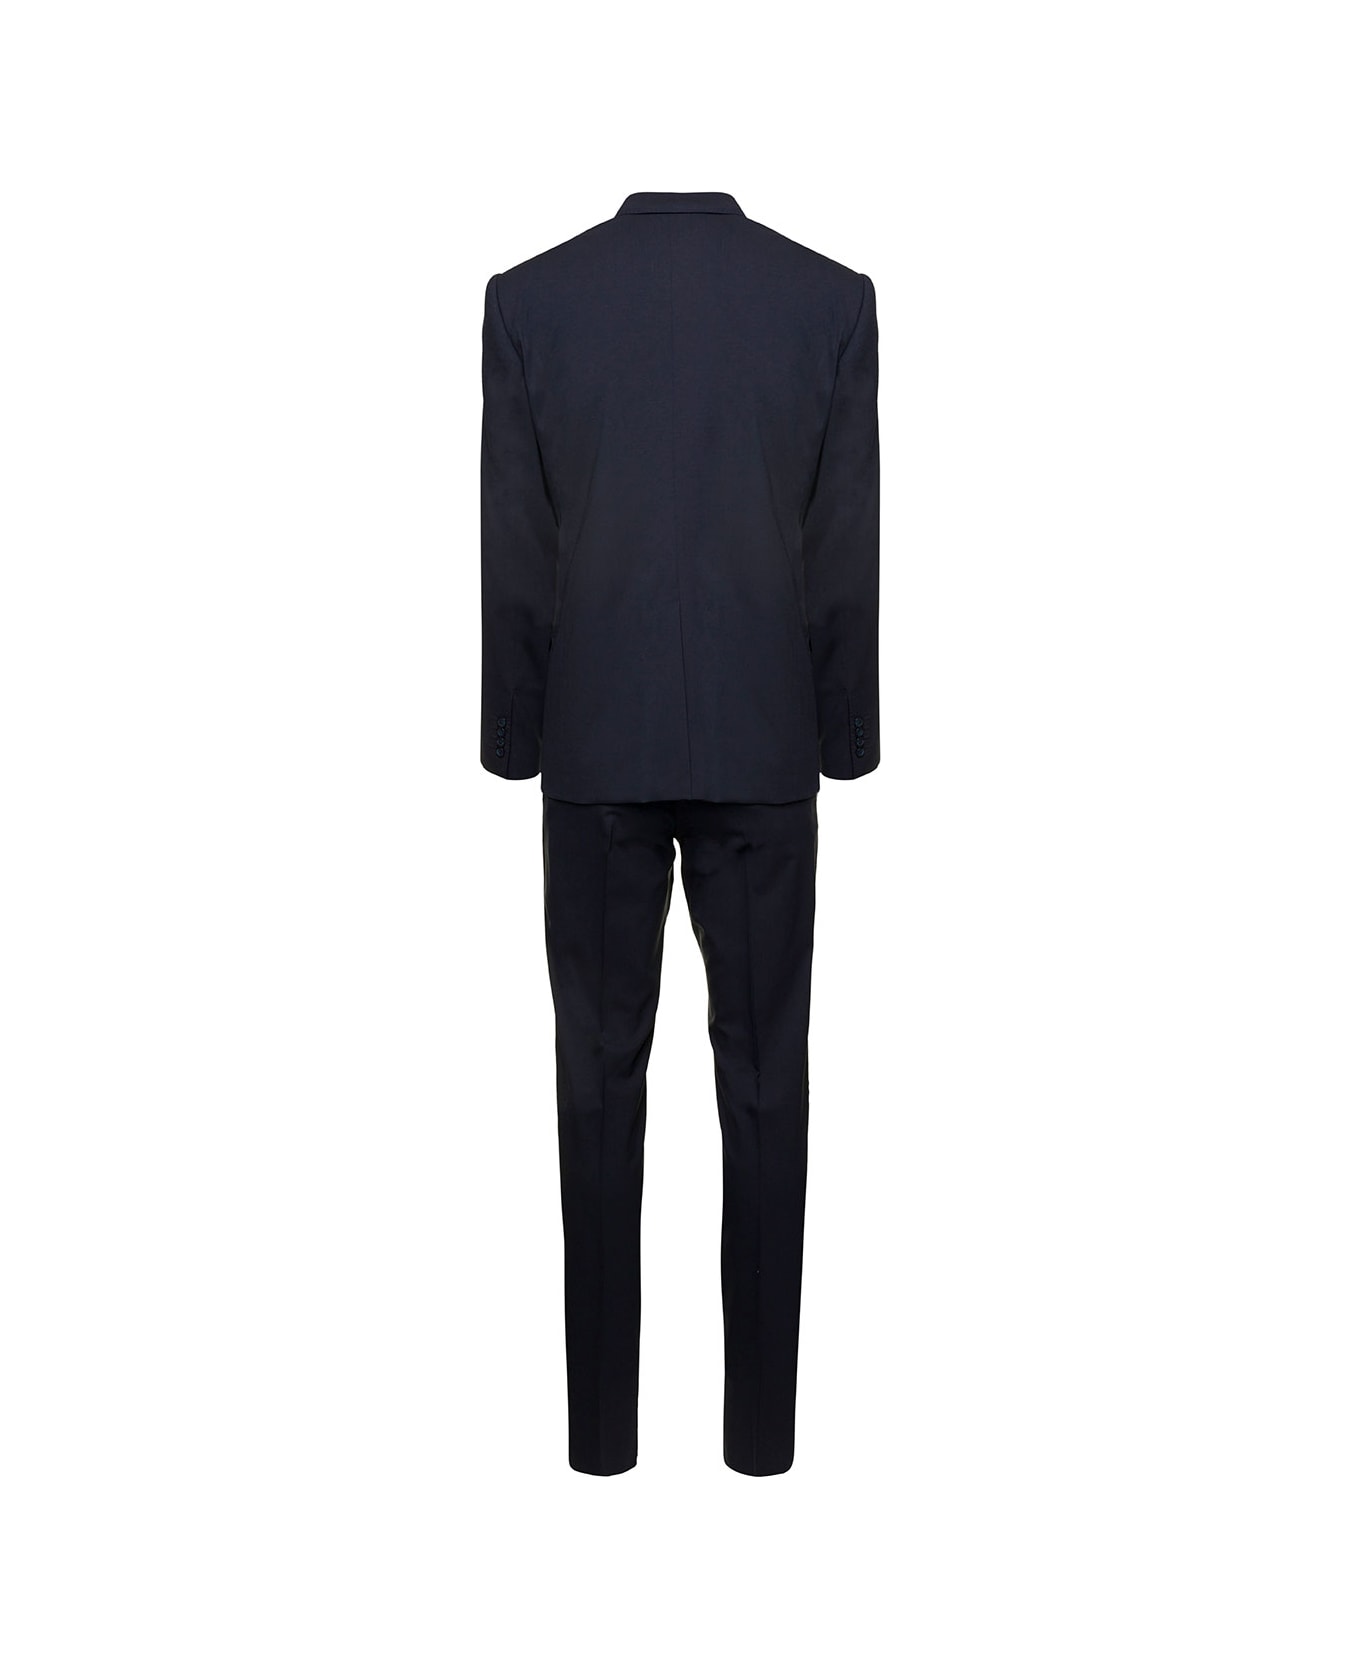 Dolce & Gabbana Blue Essential Suitblazer And Trousers Wei In Wool Man - Blu